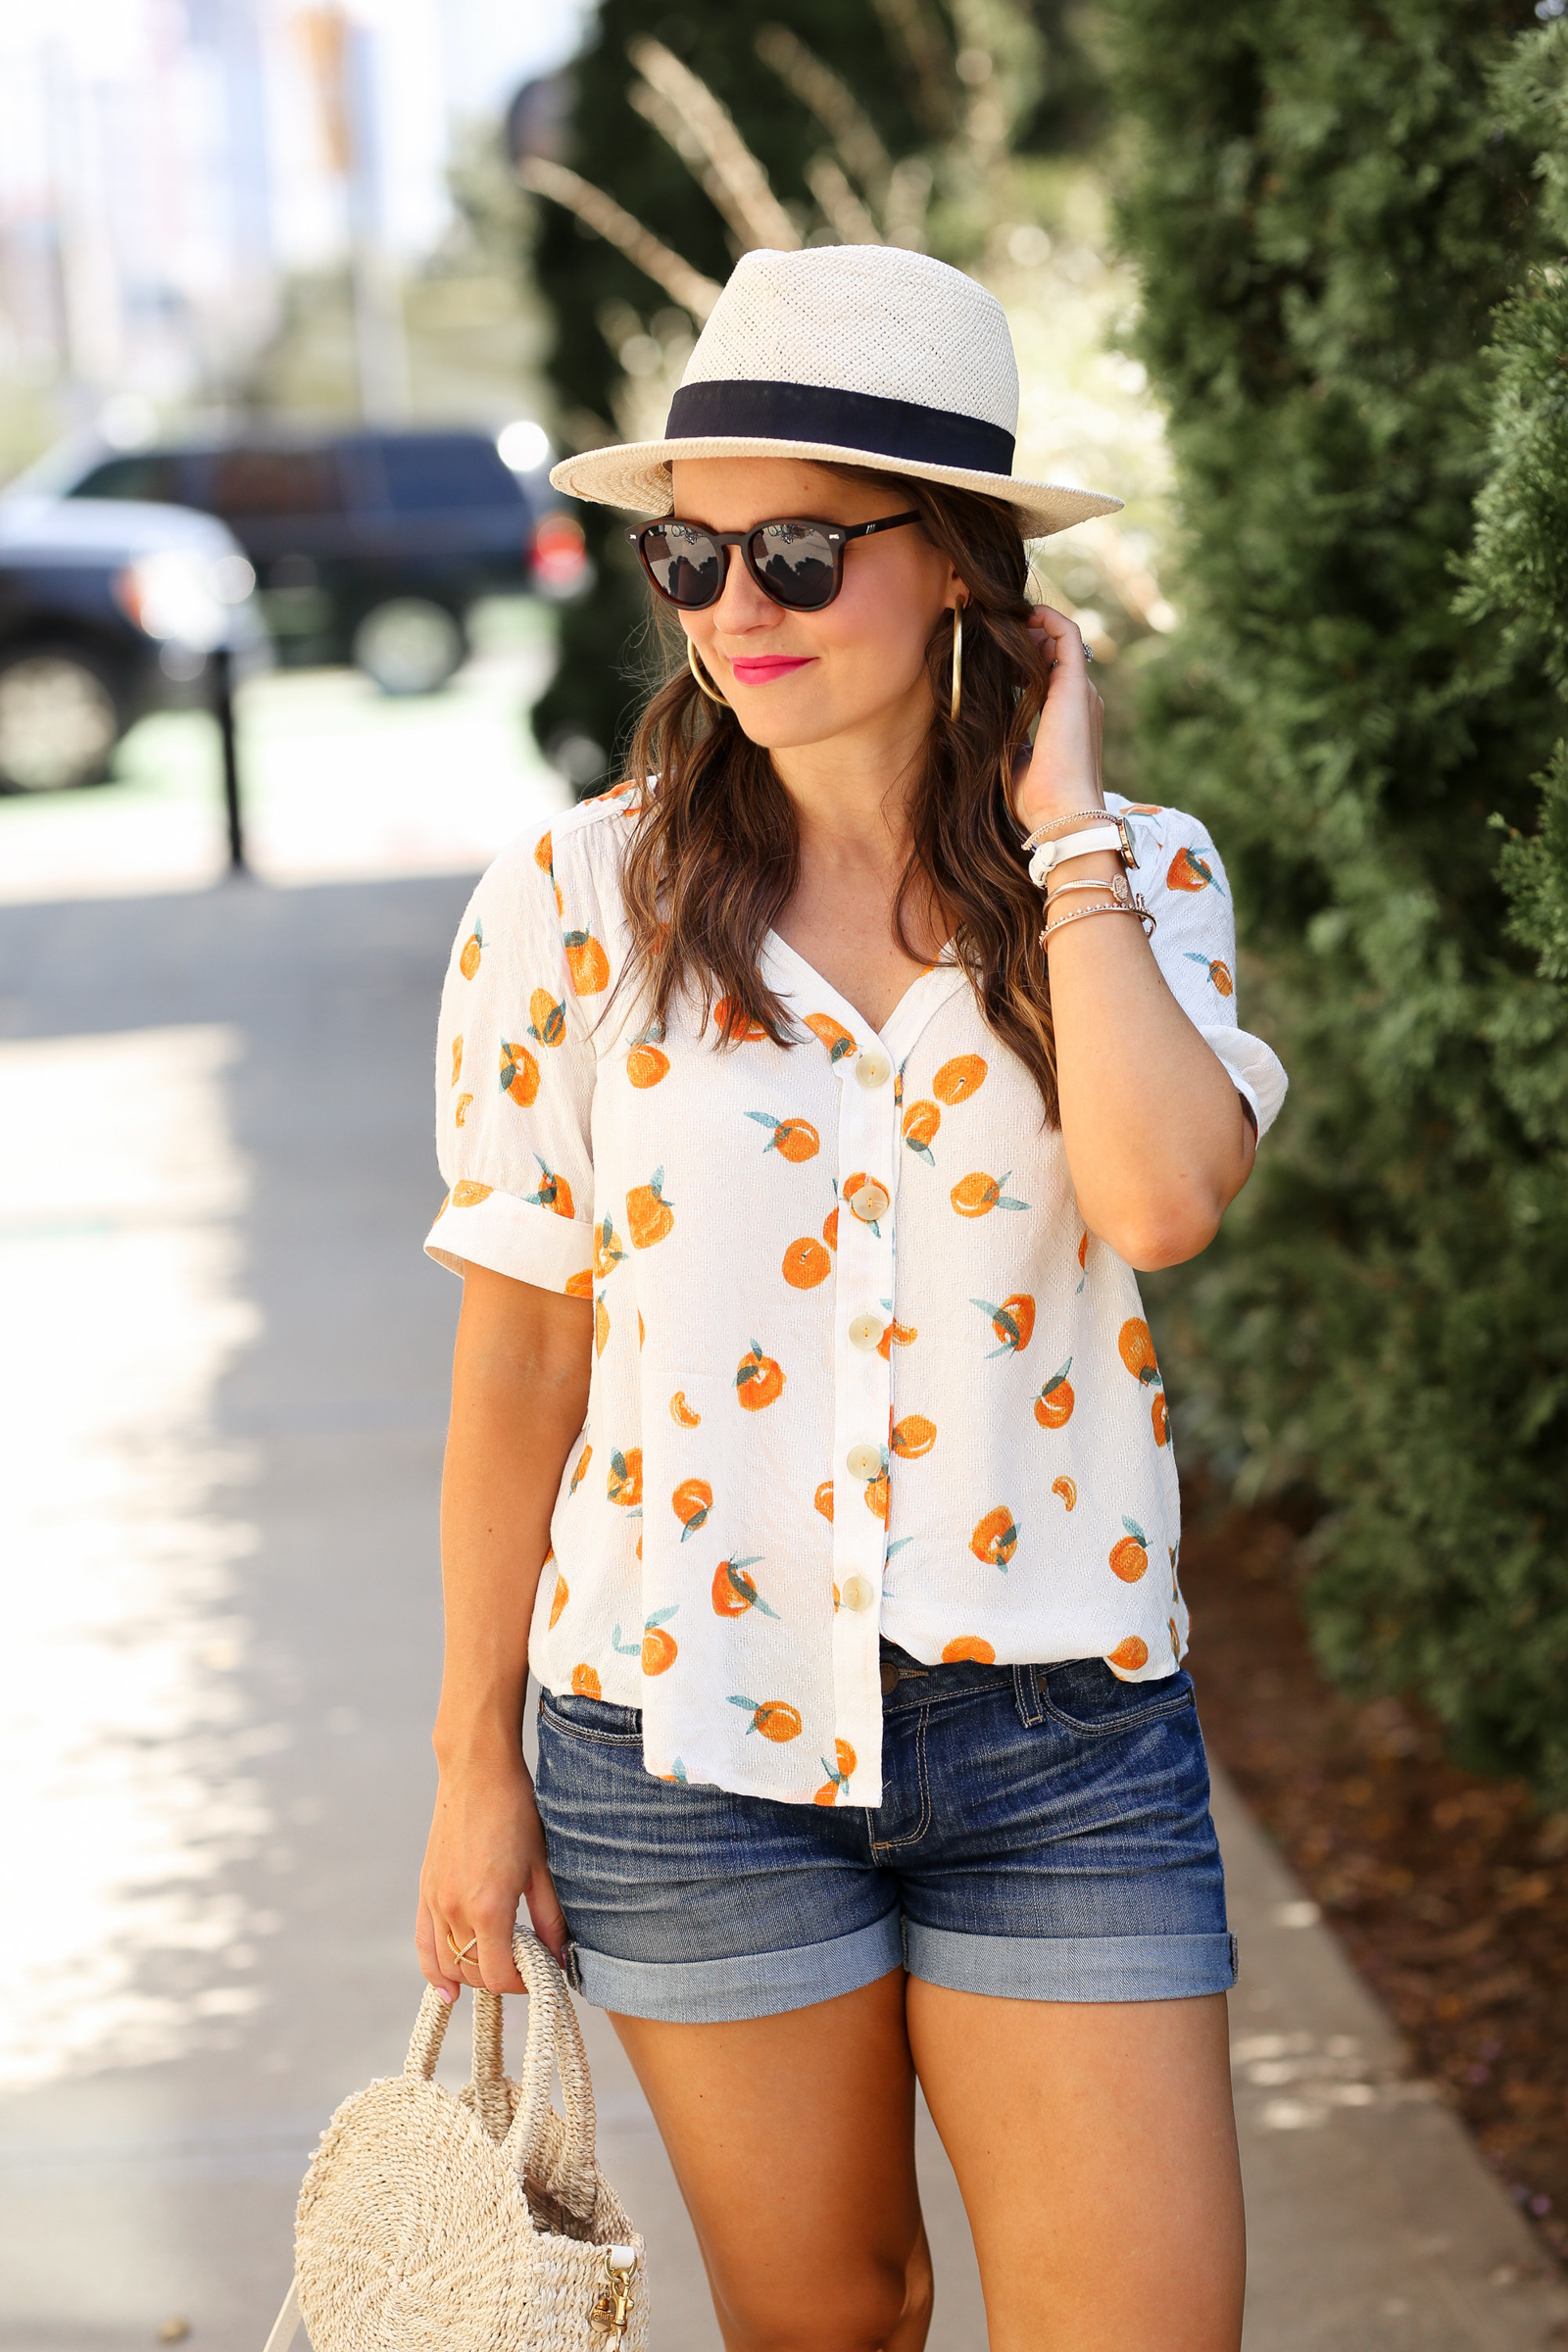 A Summer Outfit for the Office - M Loves M